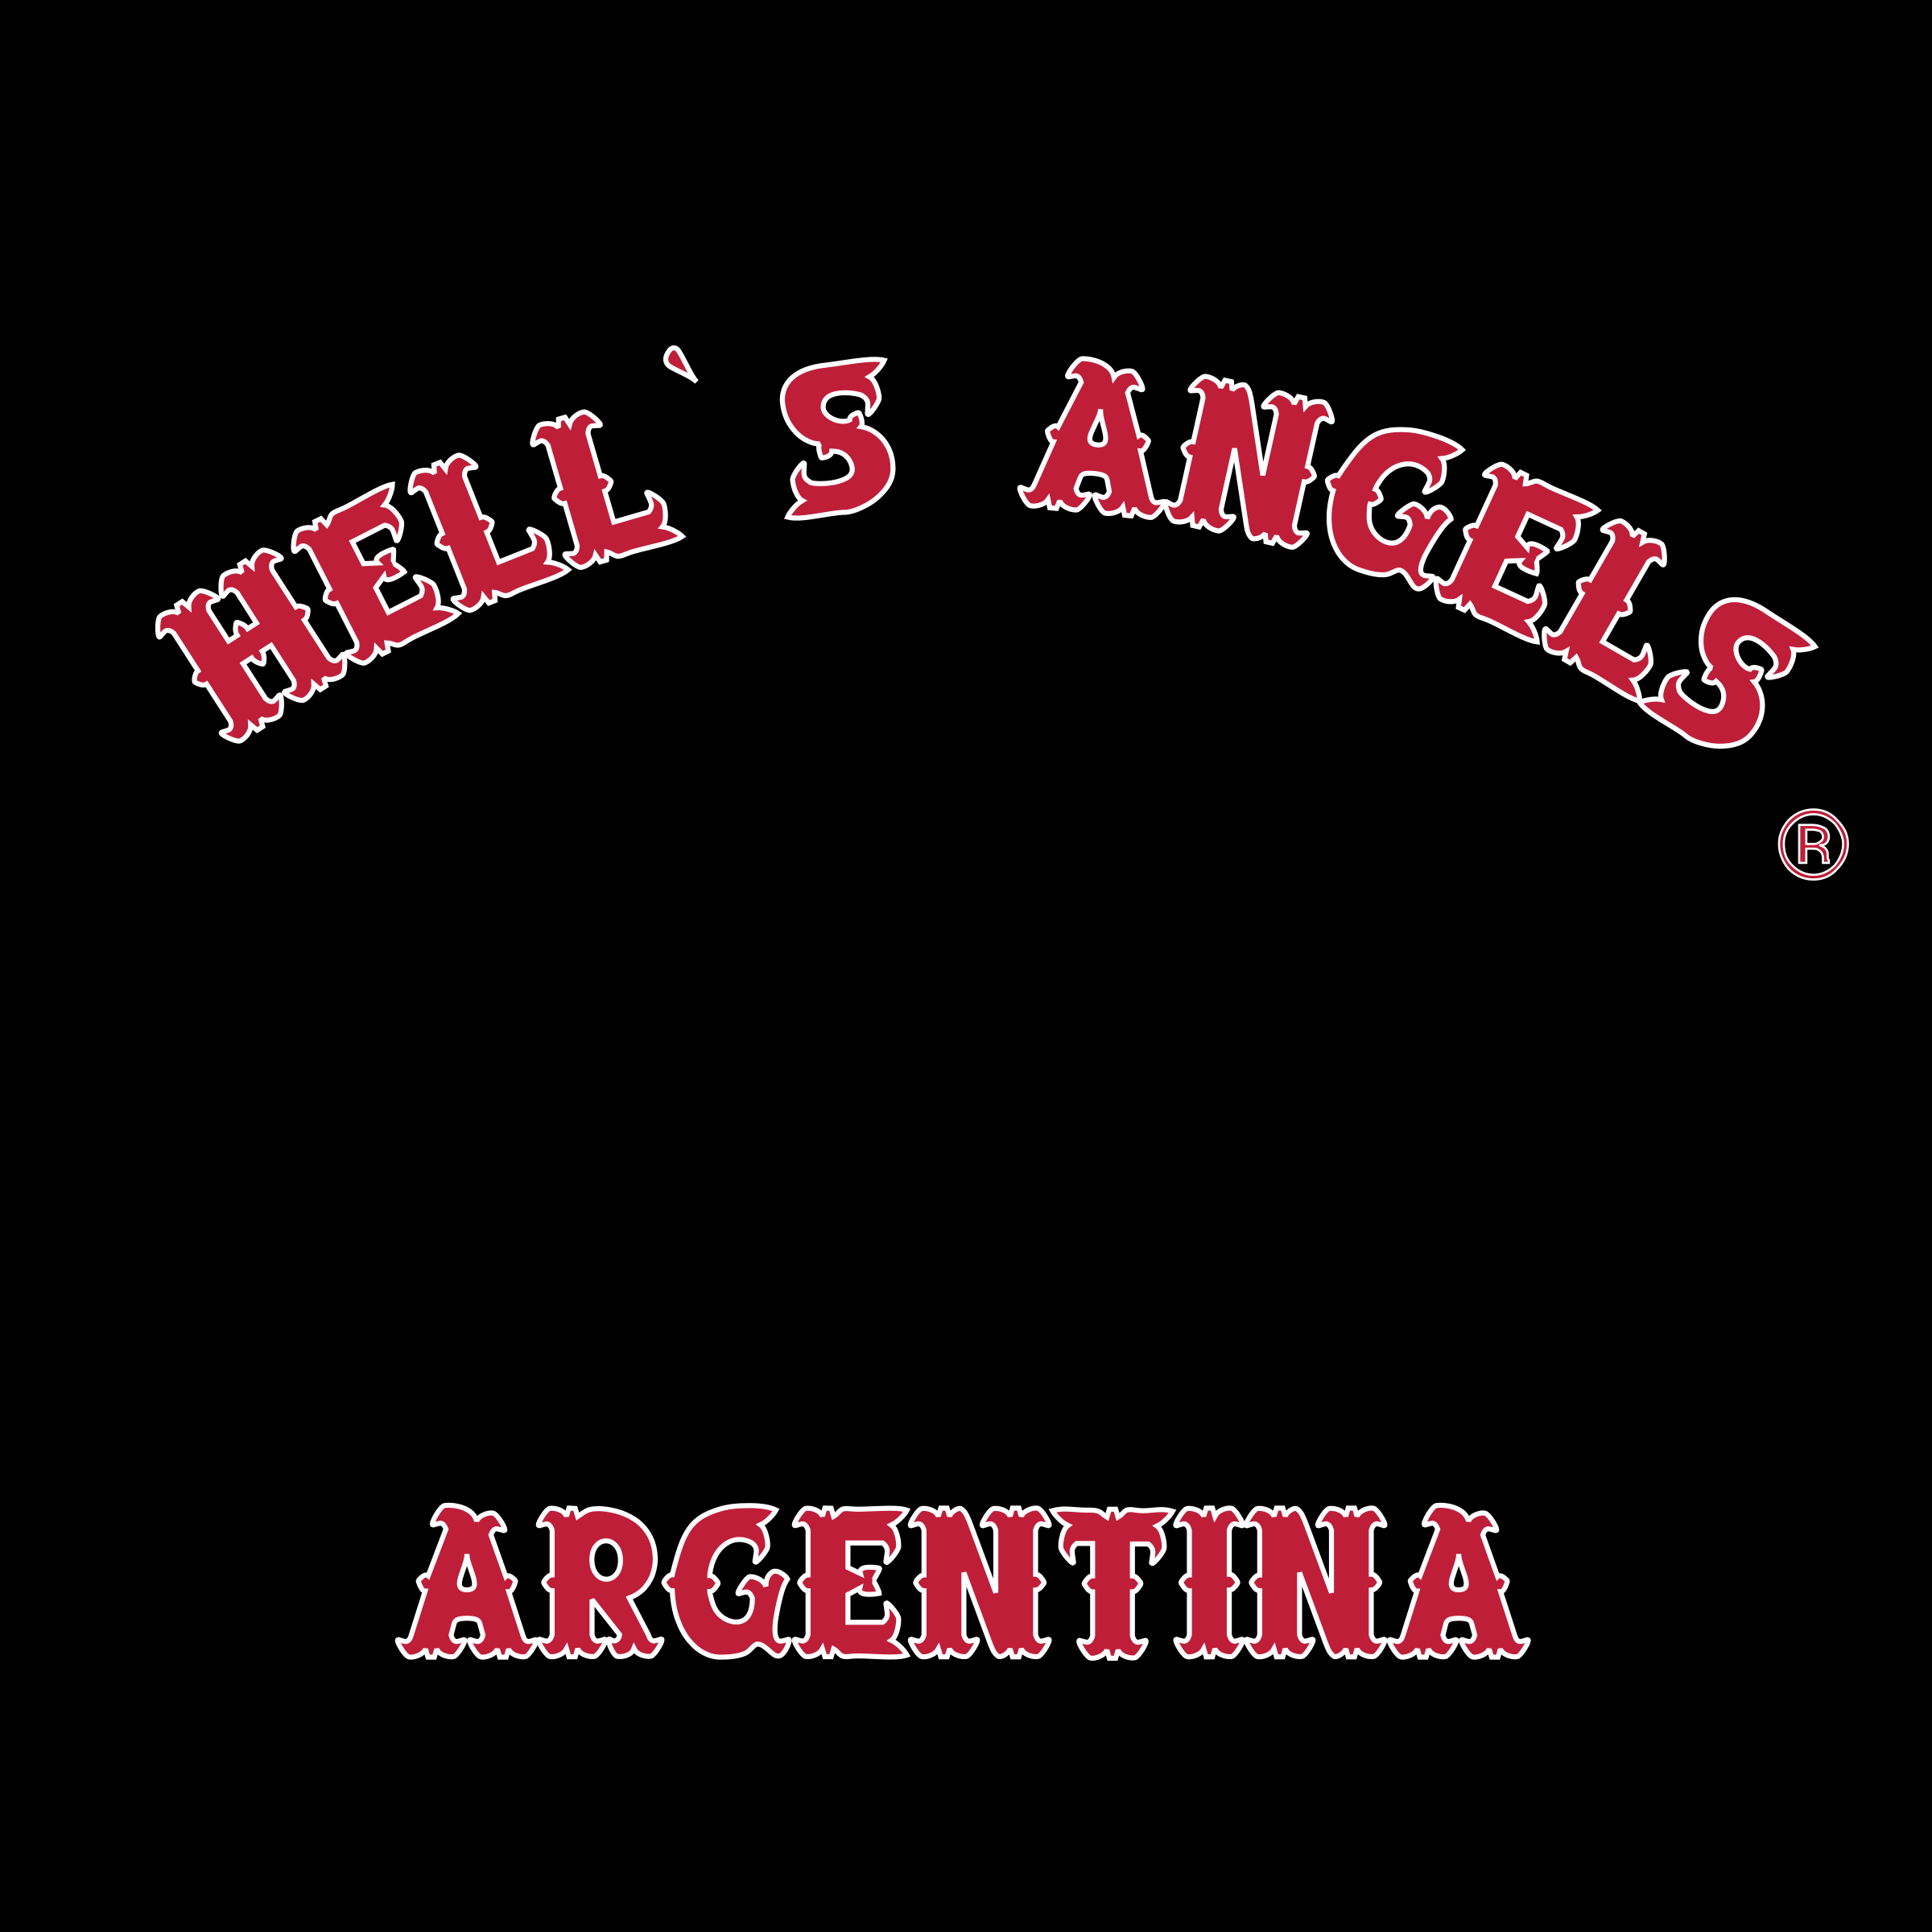 Hell's Logo - Hell's Angels Argentina Logo PNG Transparent & SVG Vector - Freebie ...